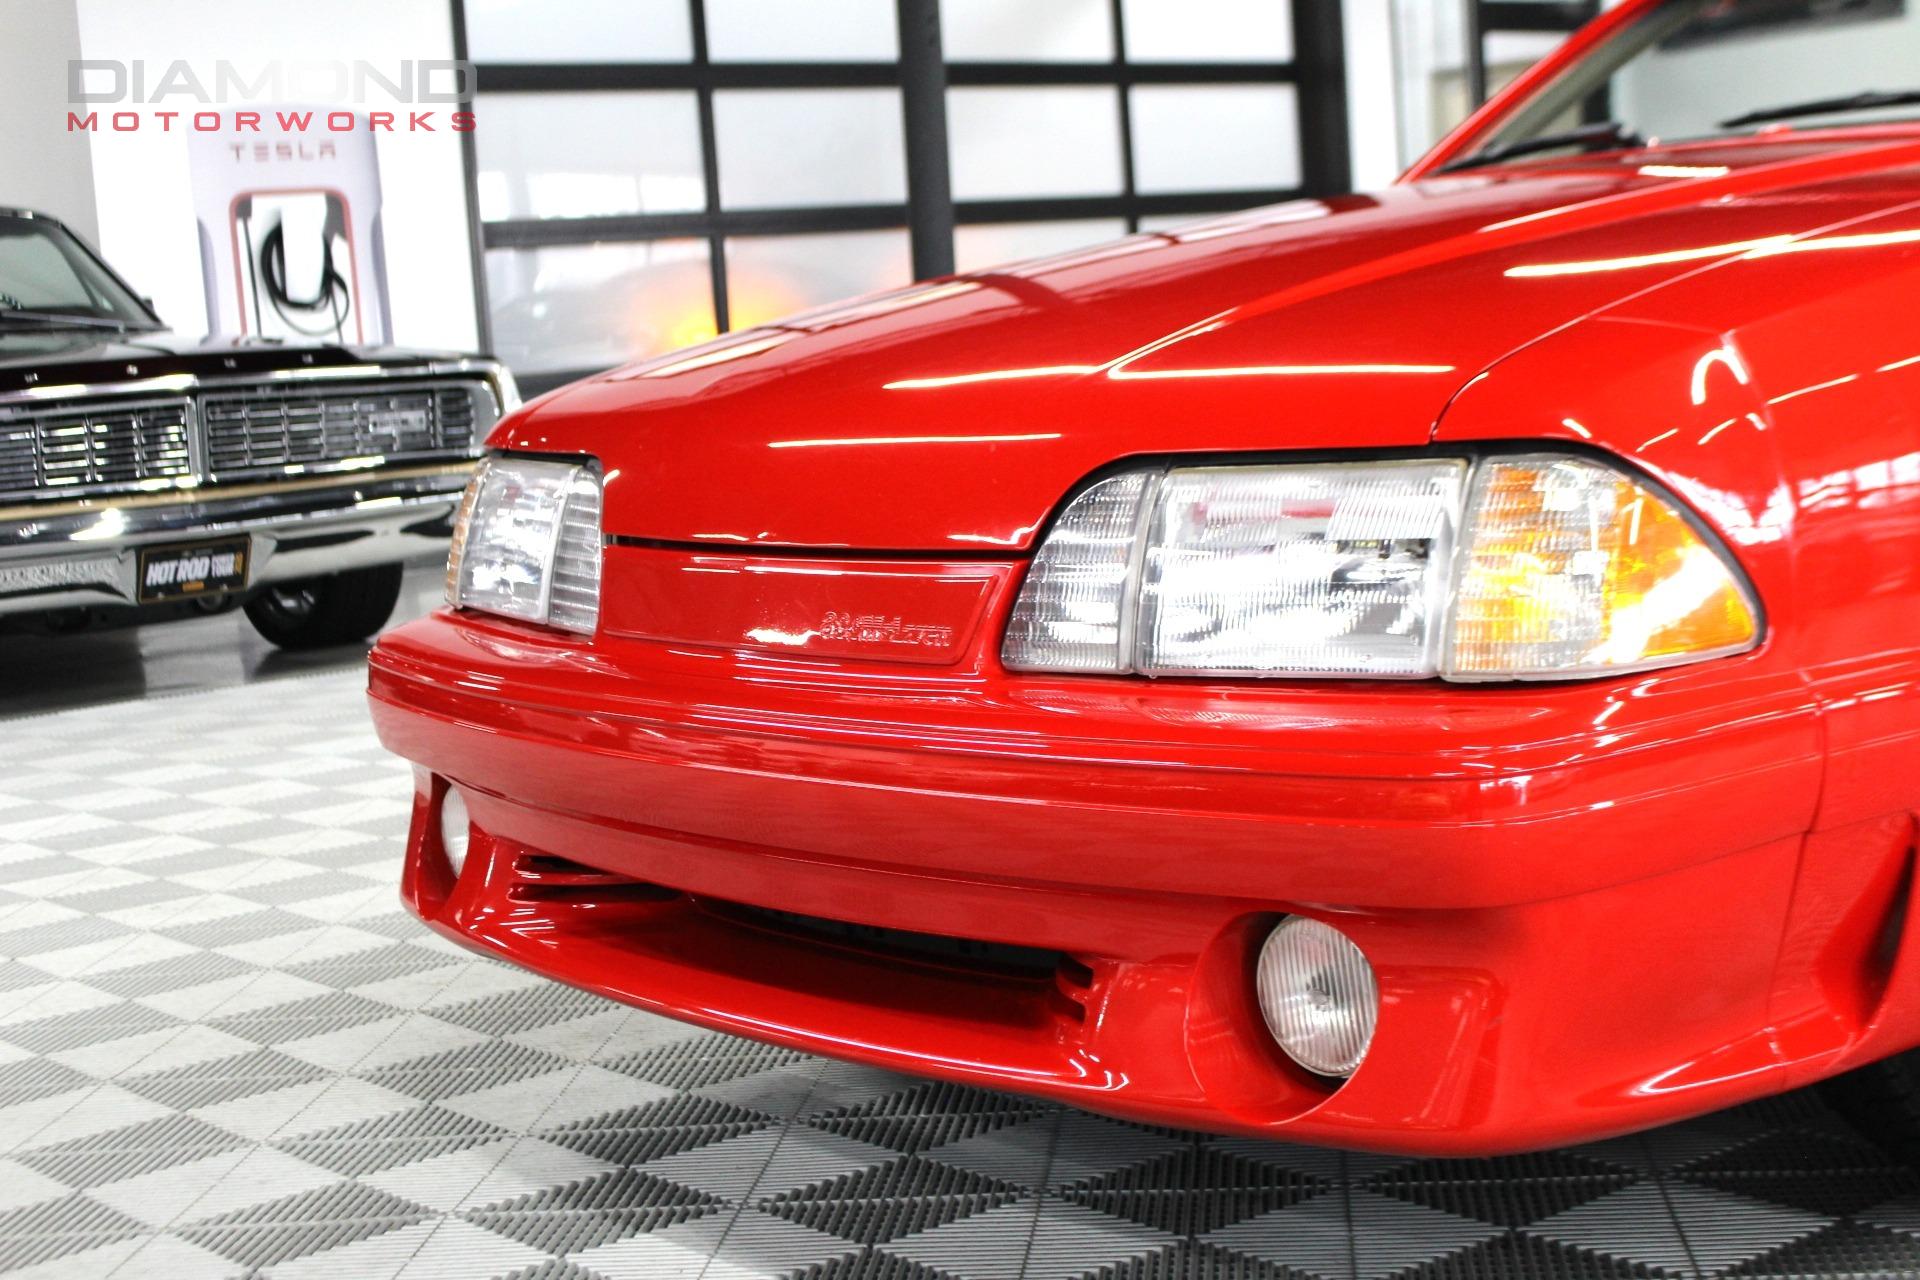 Used-1987-Ford-Mustang-ASC-Mclaren